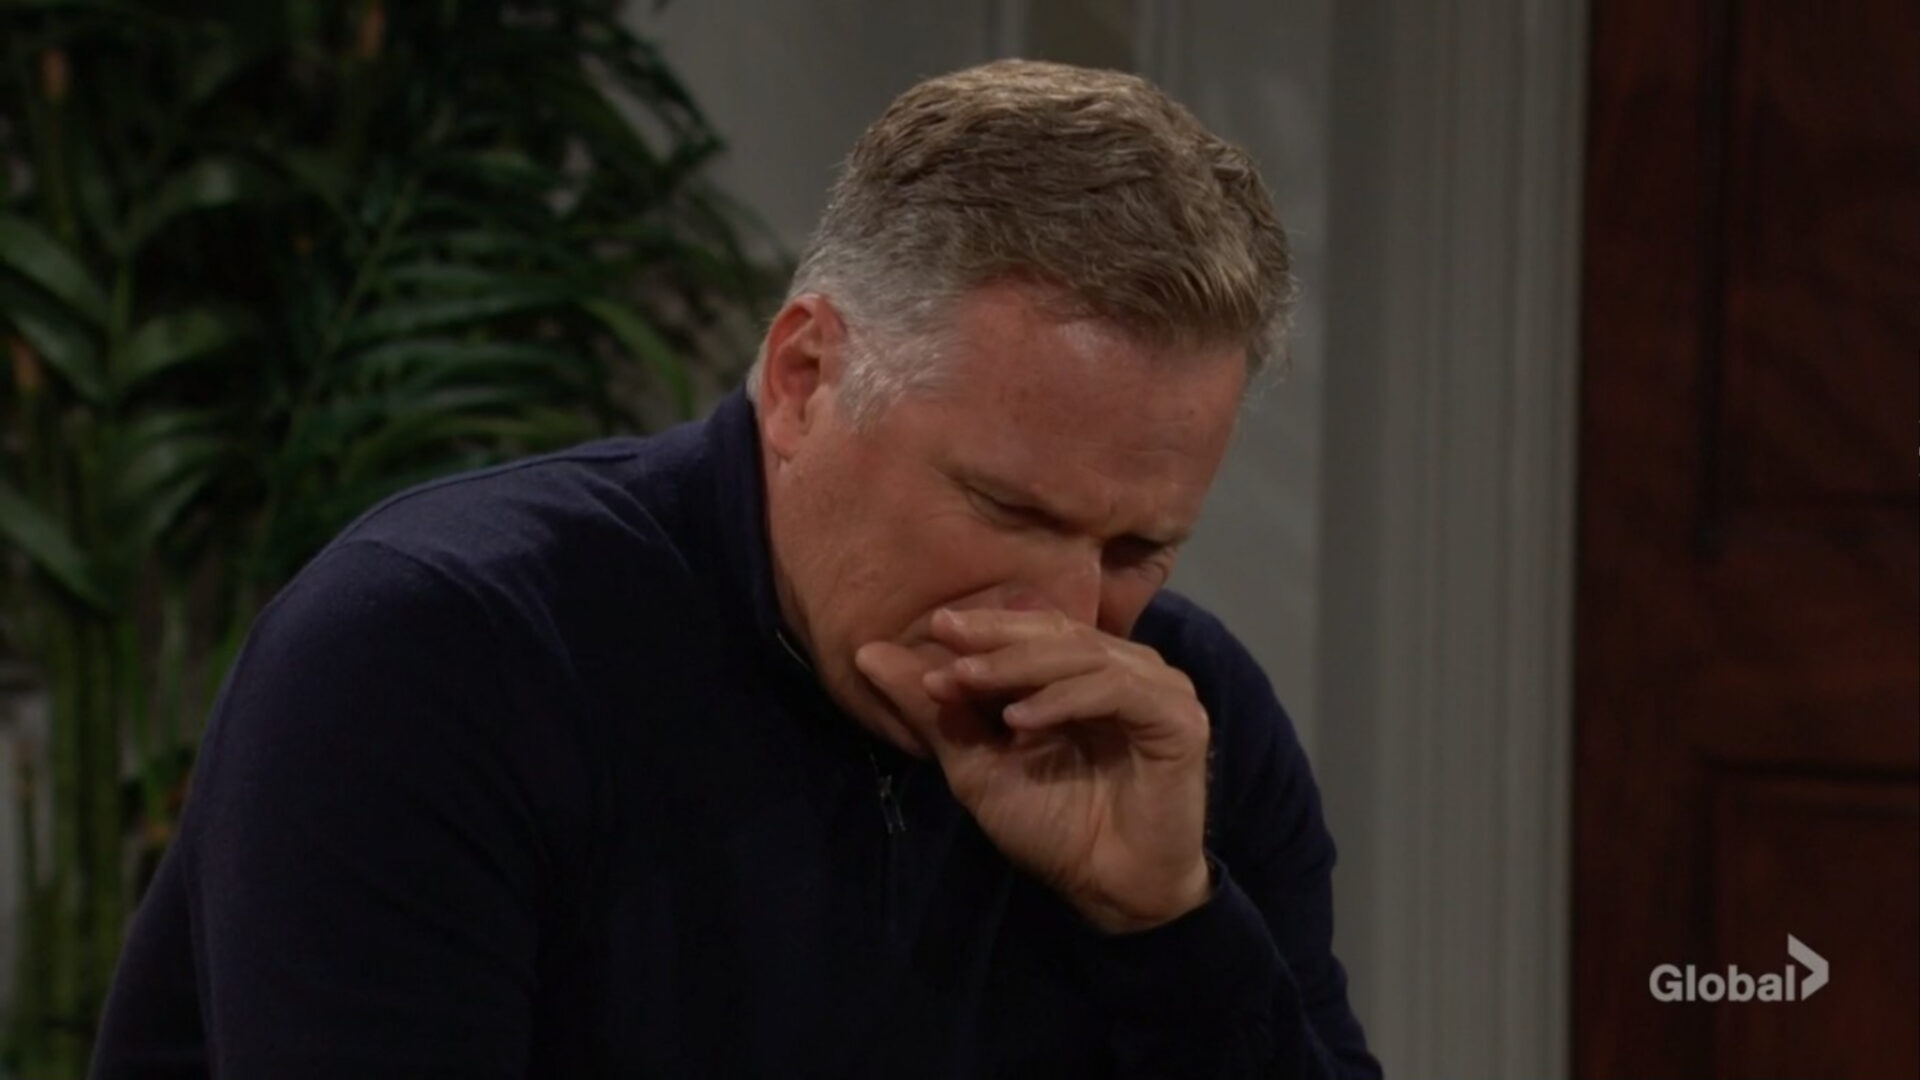 locke cries young restless